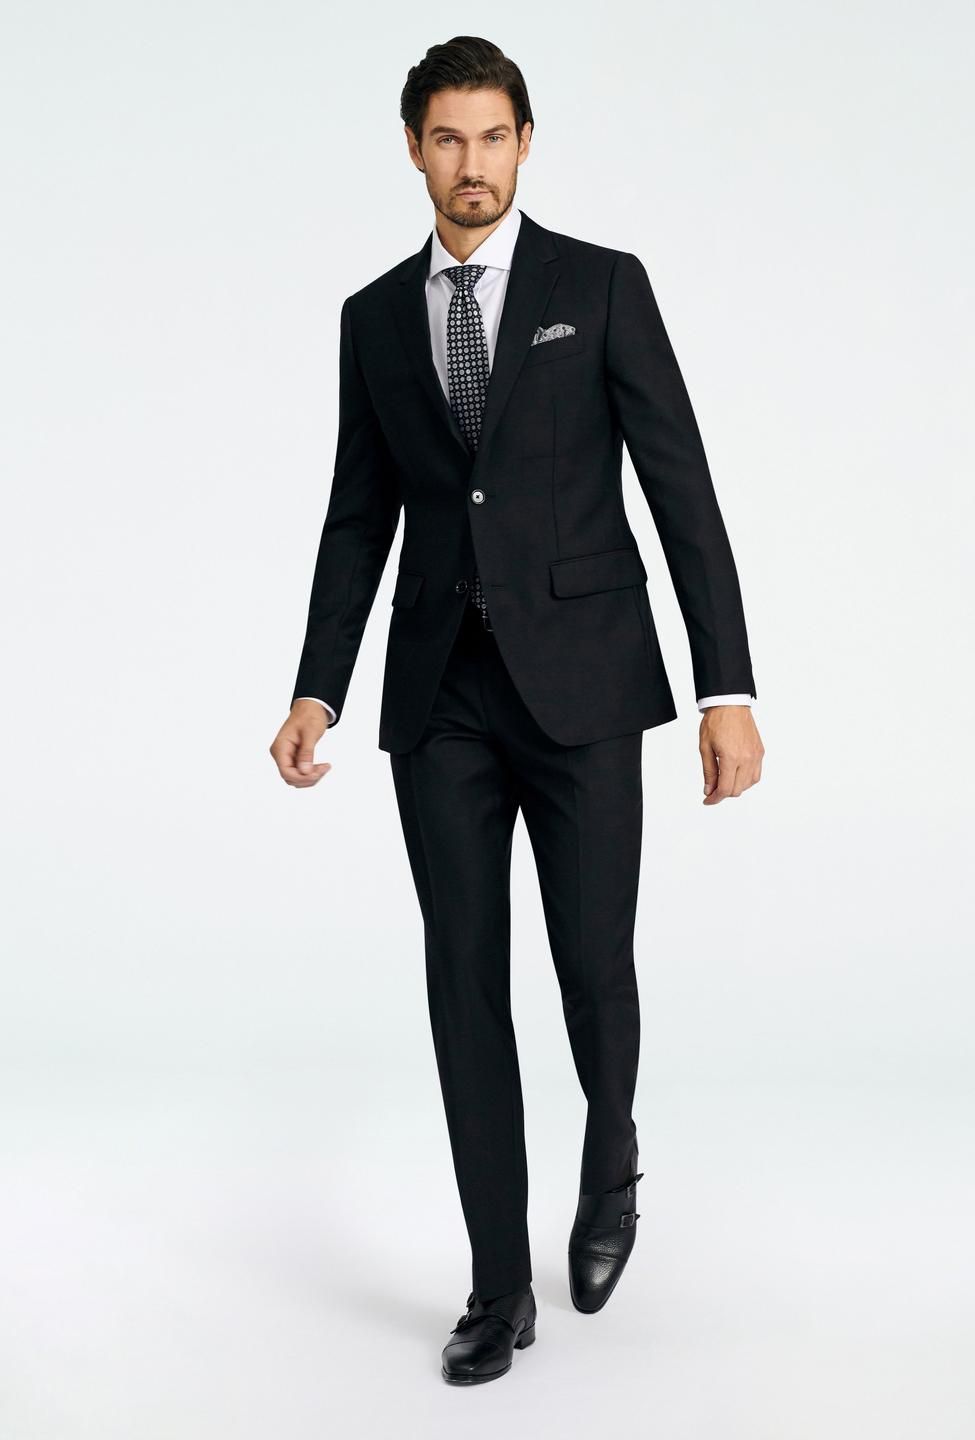 Get a discounted Indochino suit for the 20 weddings you'll need to ...